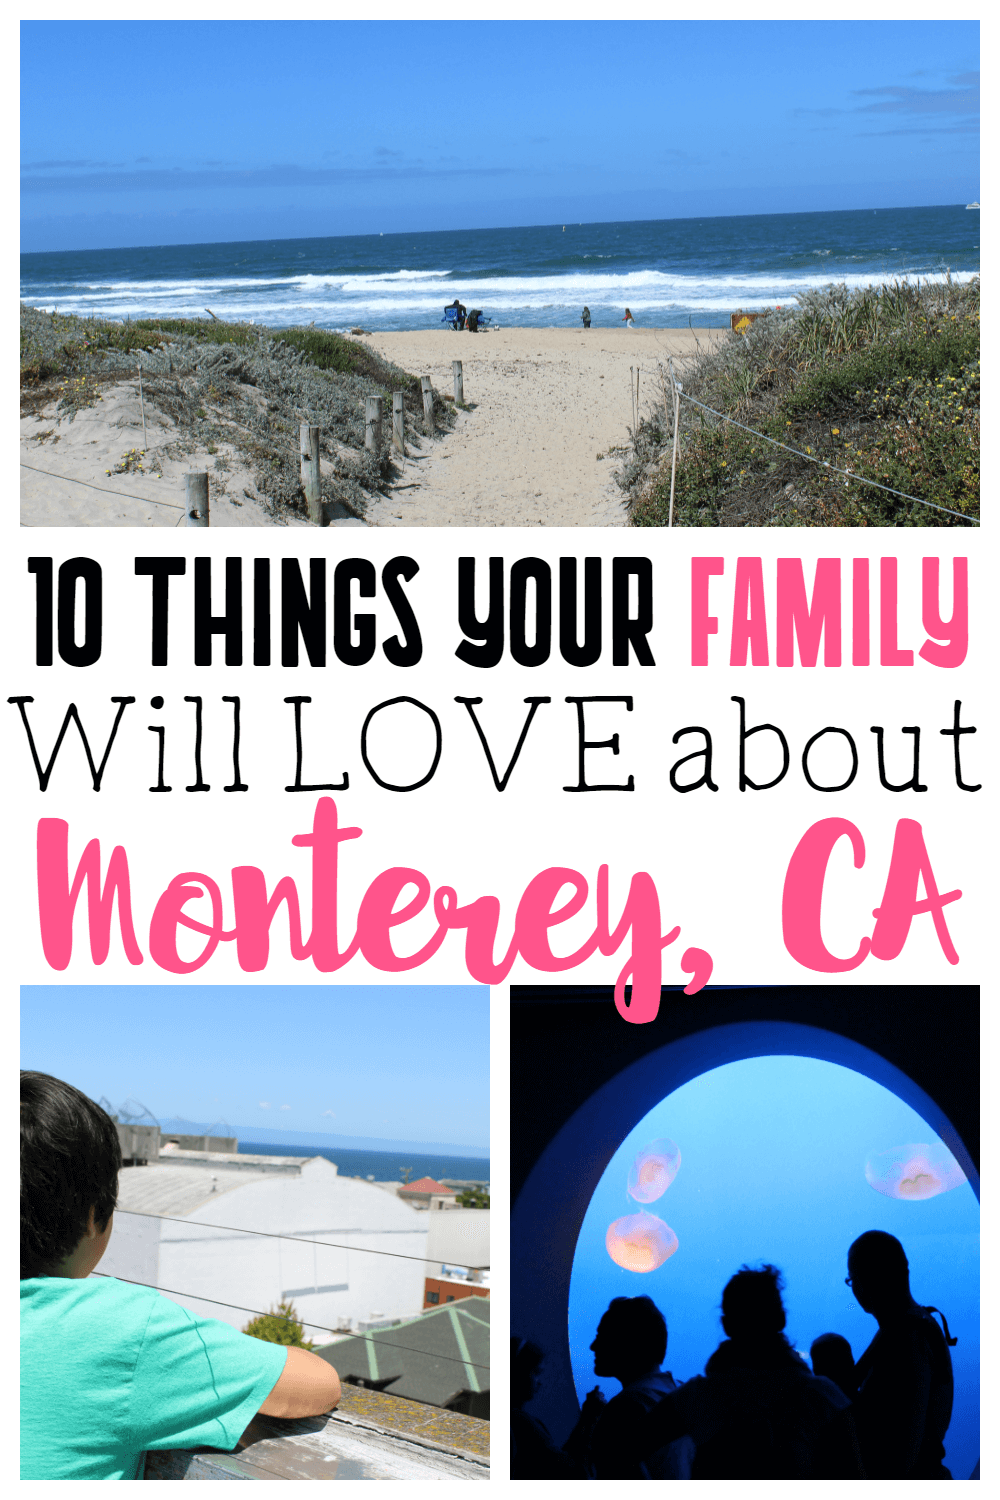 10 Things Your Family Will Love About Monterey, CA | Monterey County